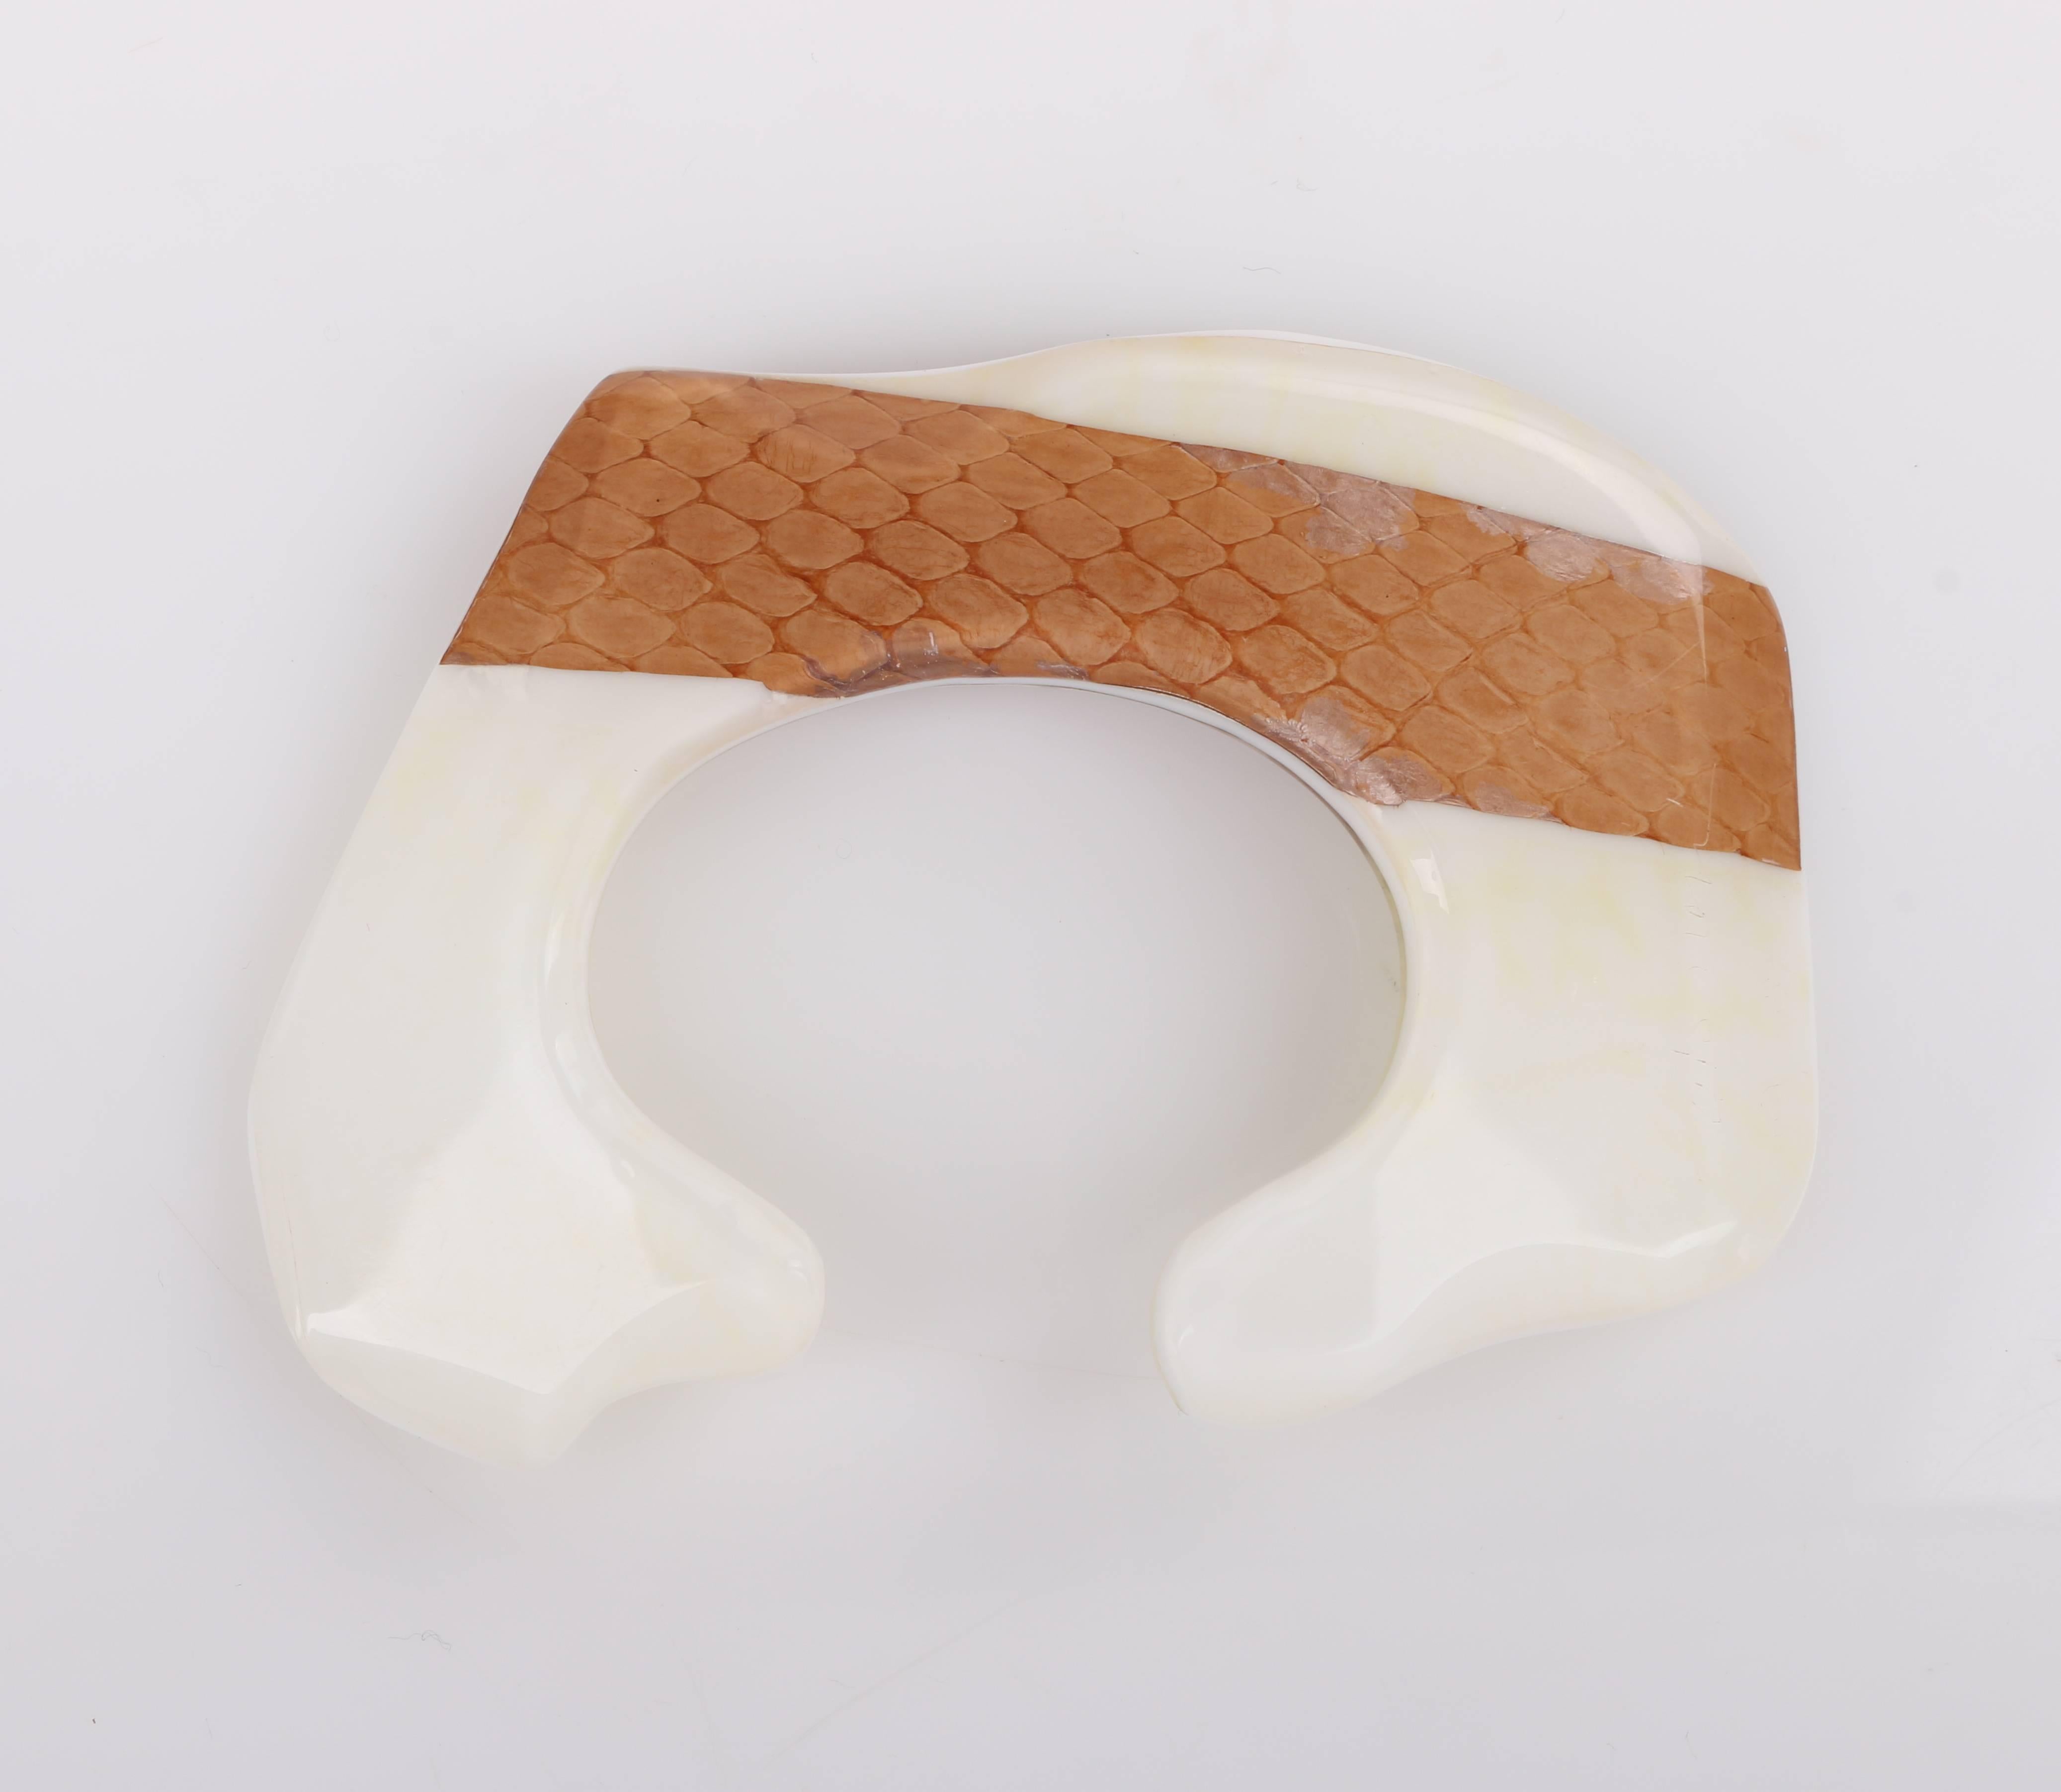 Vintage Anne Vigneri c.1984 snakeskin embedded lucite sculptural cuff bangle. Tan snakeskin embedded in off white lucite. Asymmetrical sculptural shape. Slip-on style. Piece is dated: 